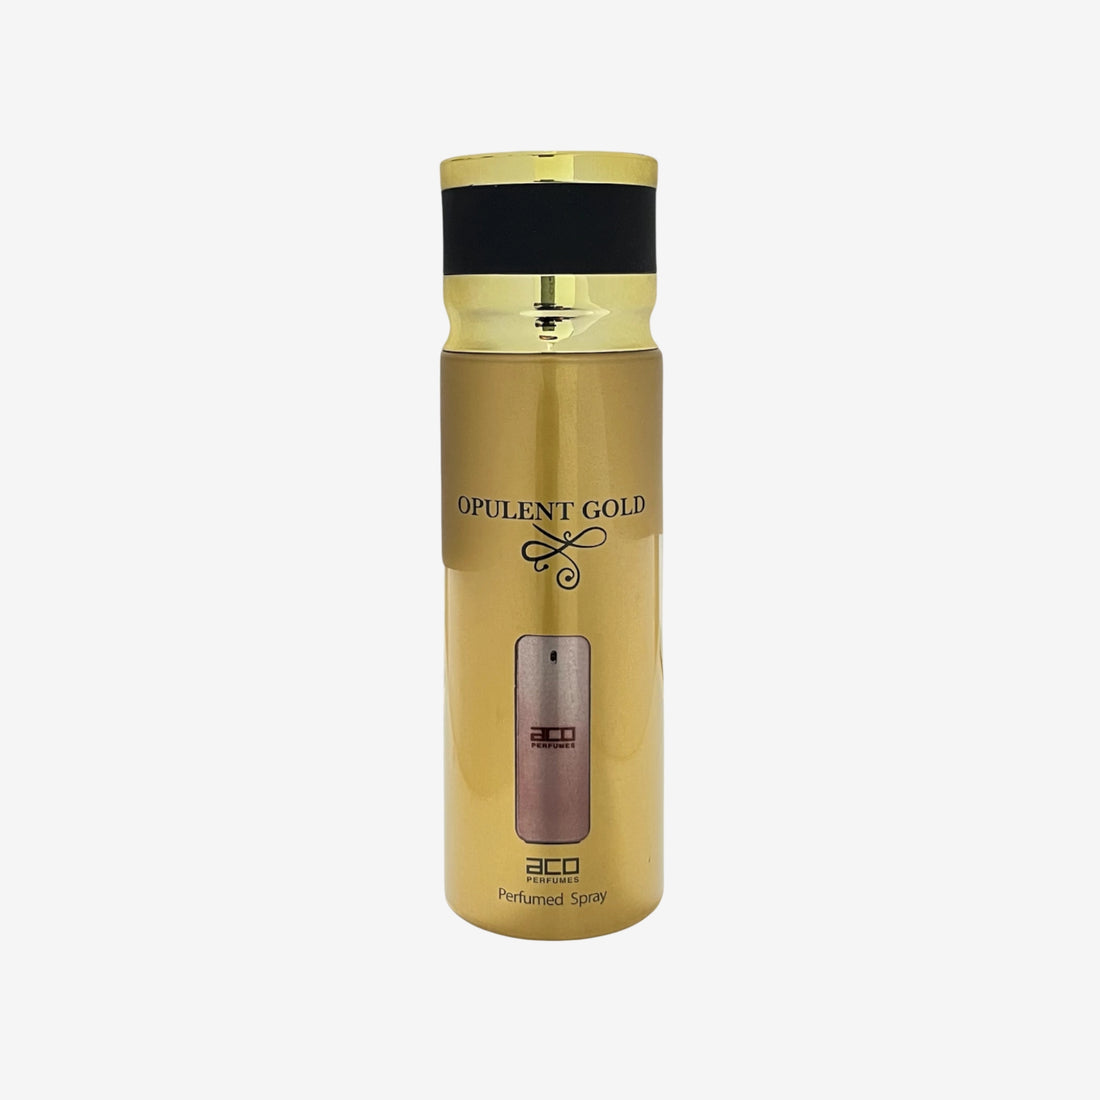 ACO Perfumes OPULENT GOLD Perfume Body Spray - Inspired By 1 Million